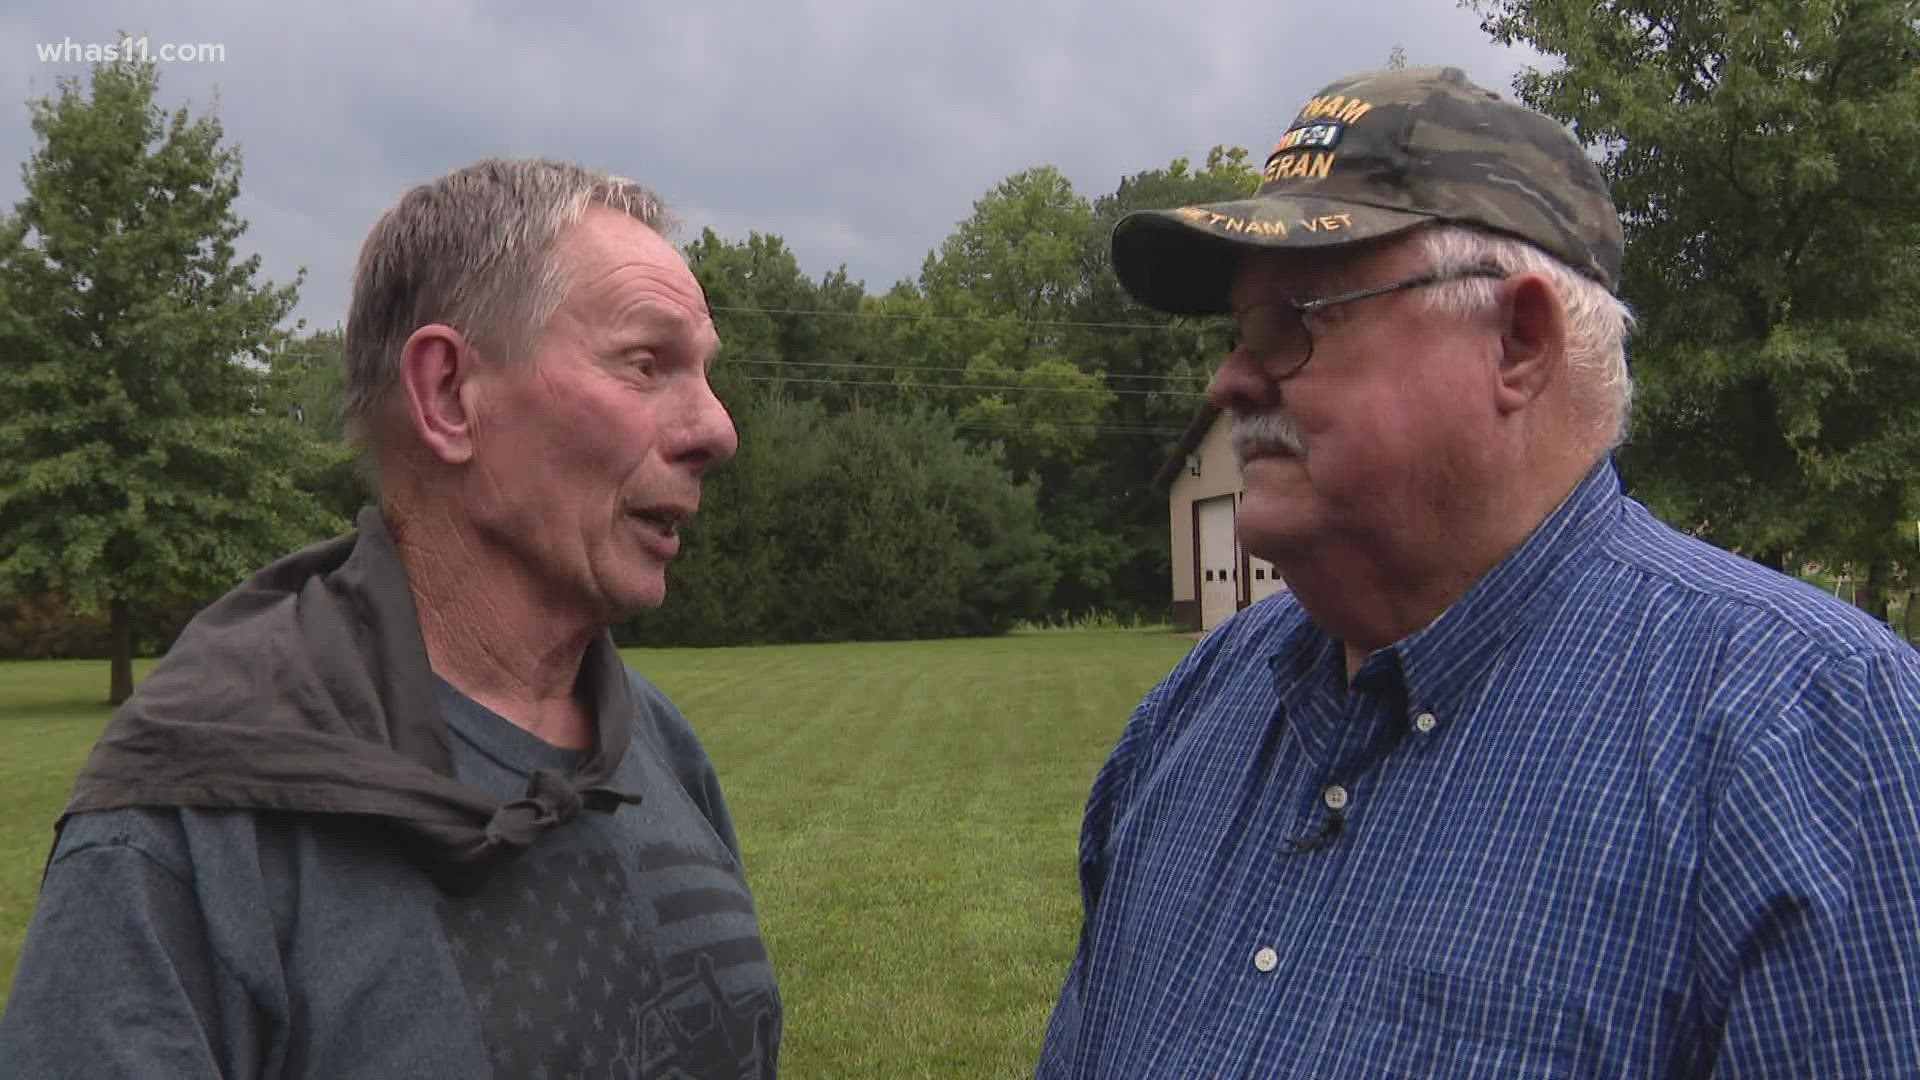 When Minnesotan Fred Kjorlien was gravely wounded in Vietnam, Dale Edge took swift action and saved his life.